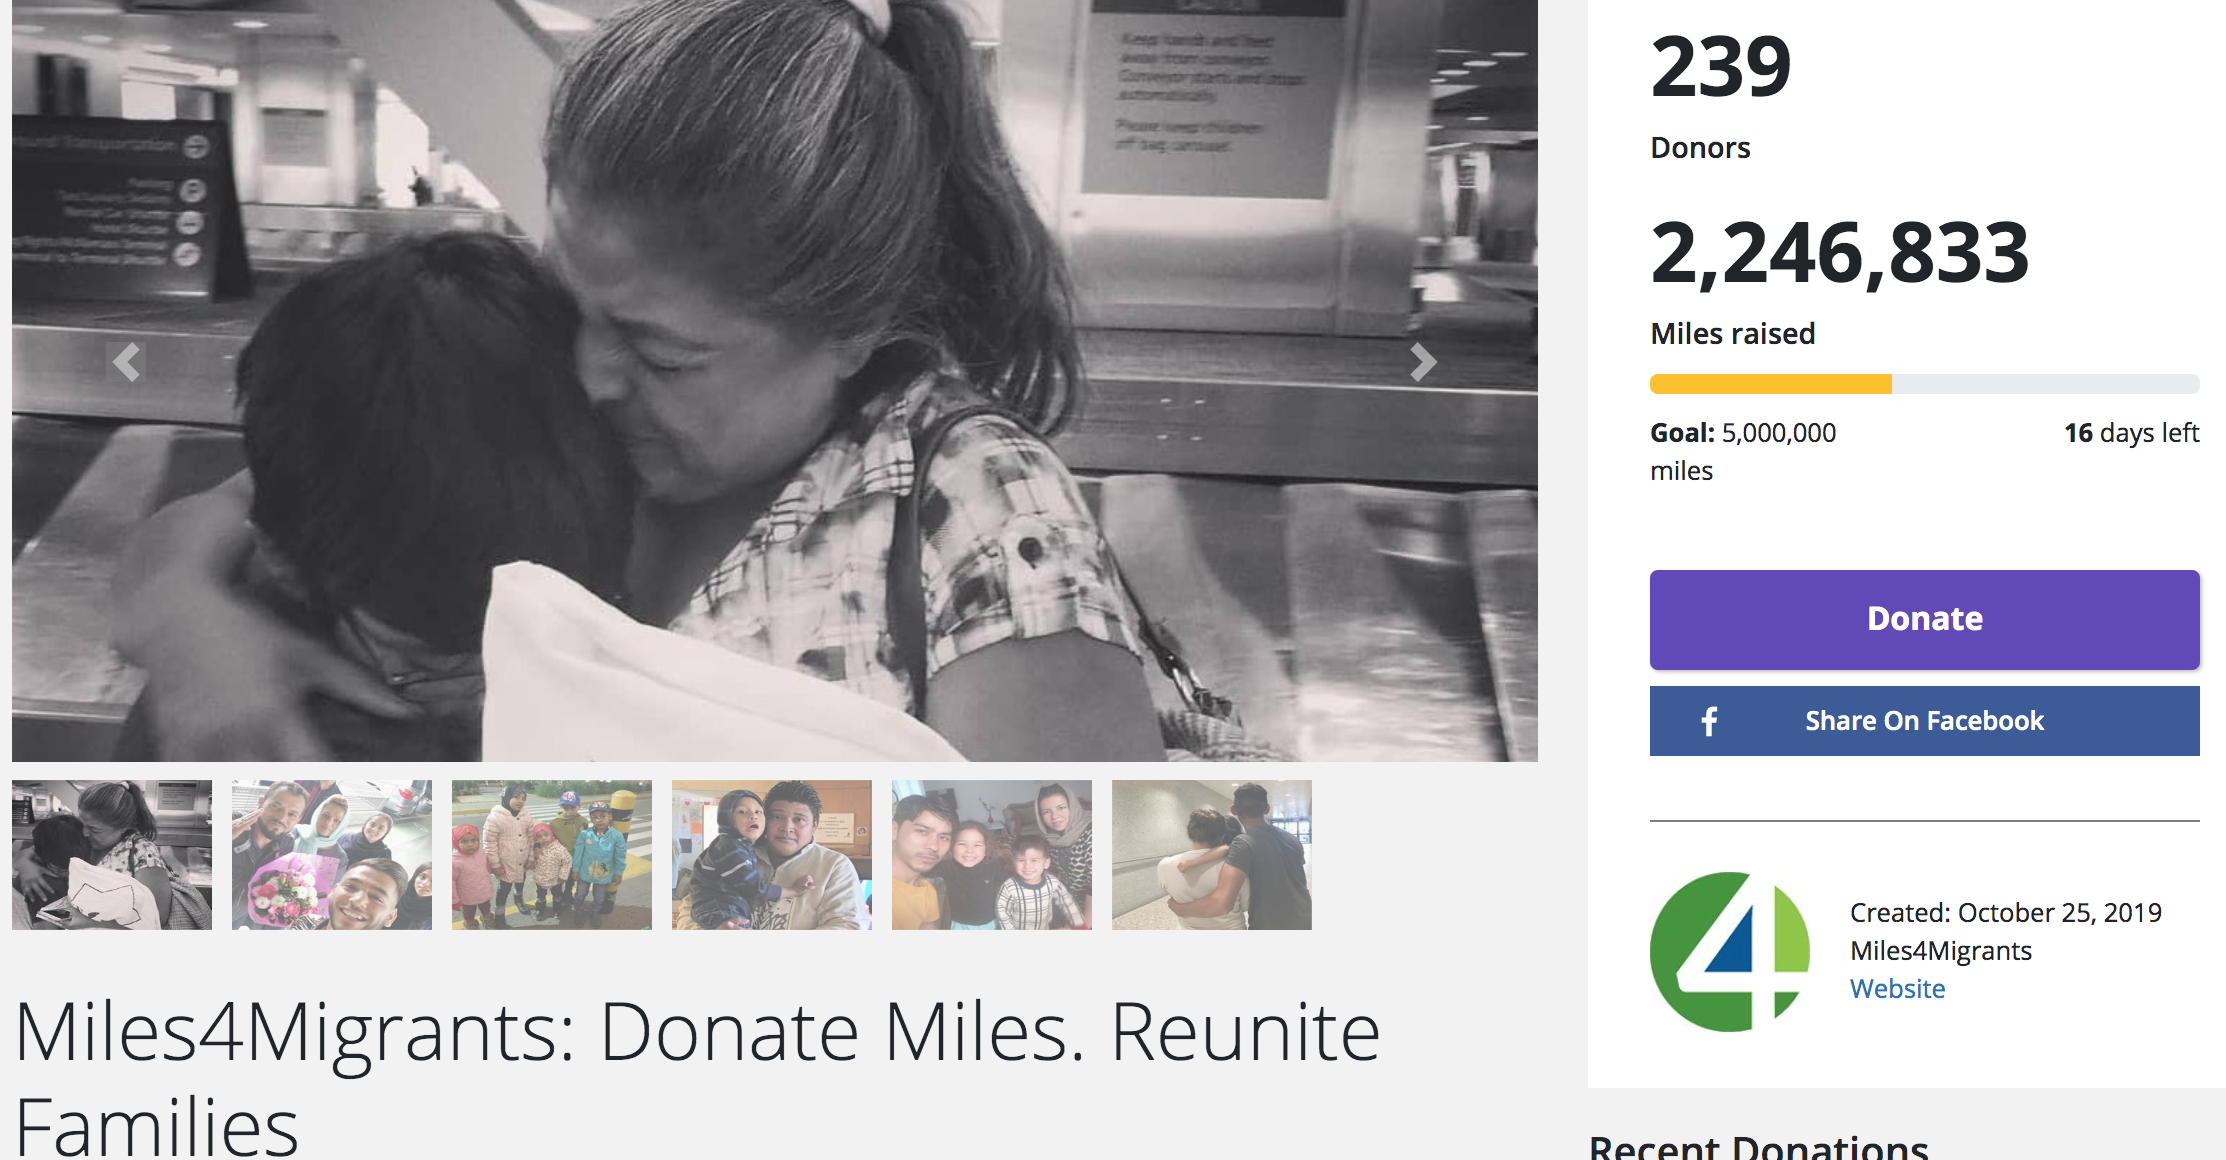 donate united miles to help families reunite